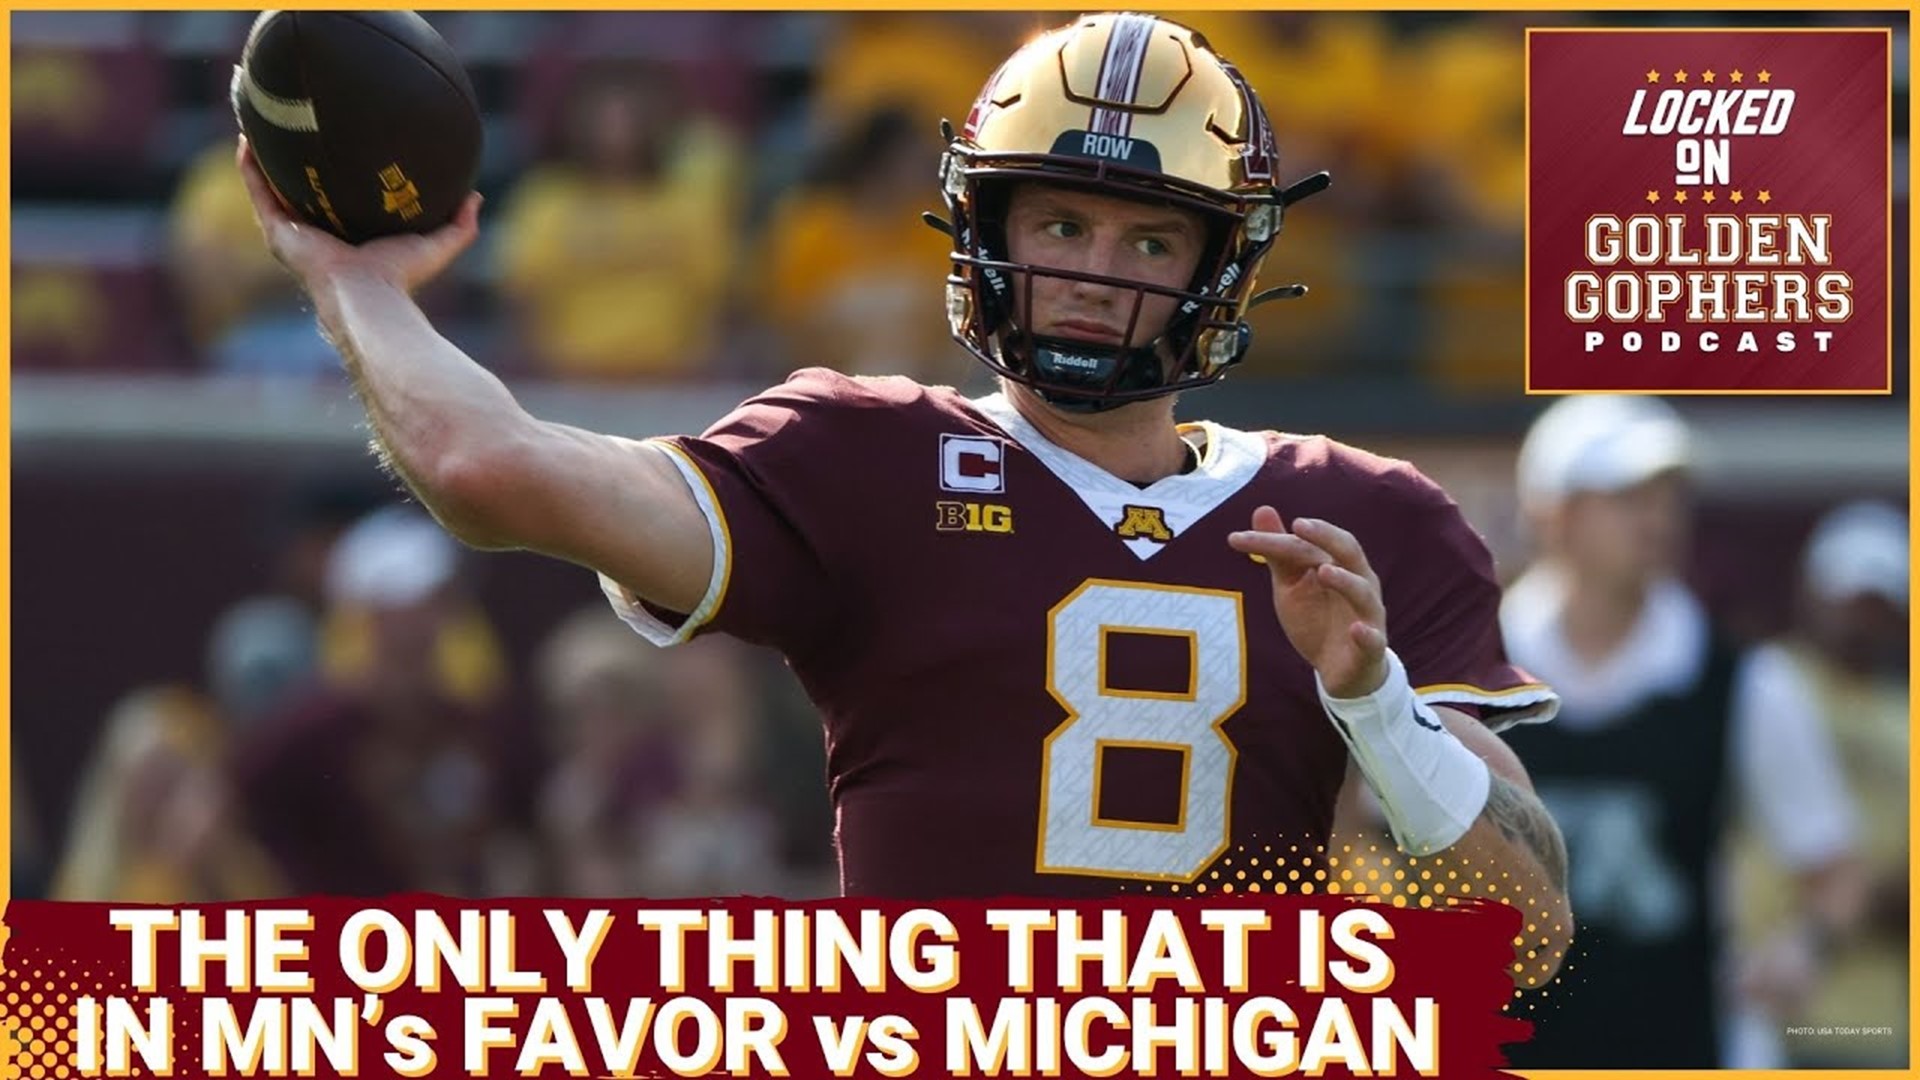 On today's episode of the Locked On Golden Gophers podcast we discuss the finer details of the Michigan Wolverines matchup for the Minnesota Gophers